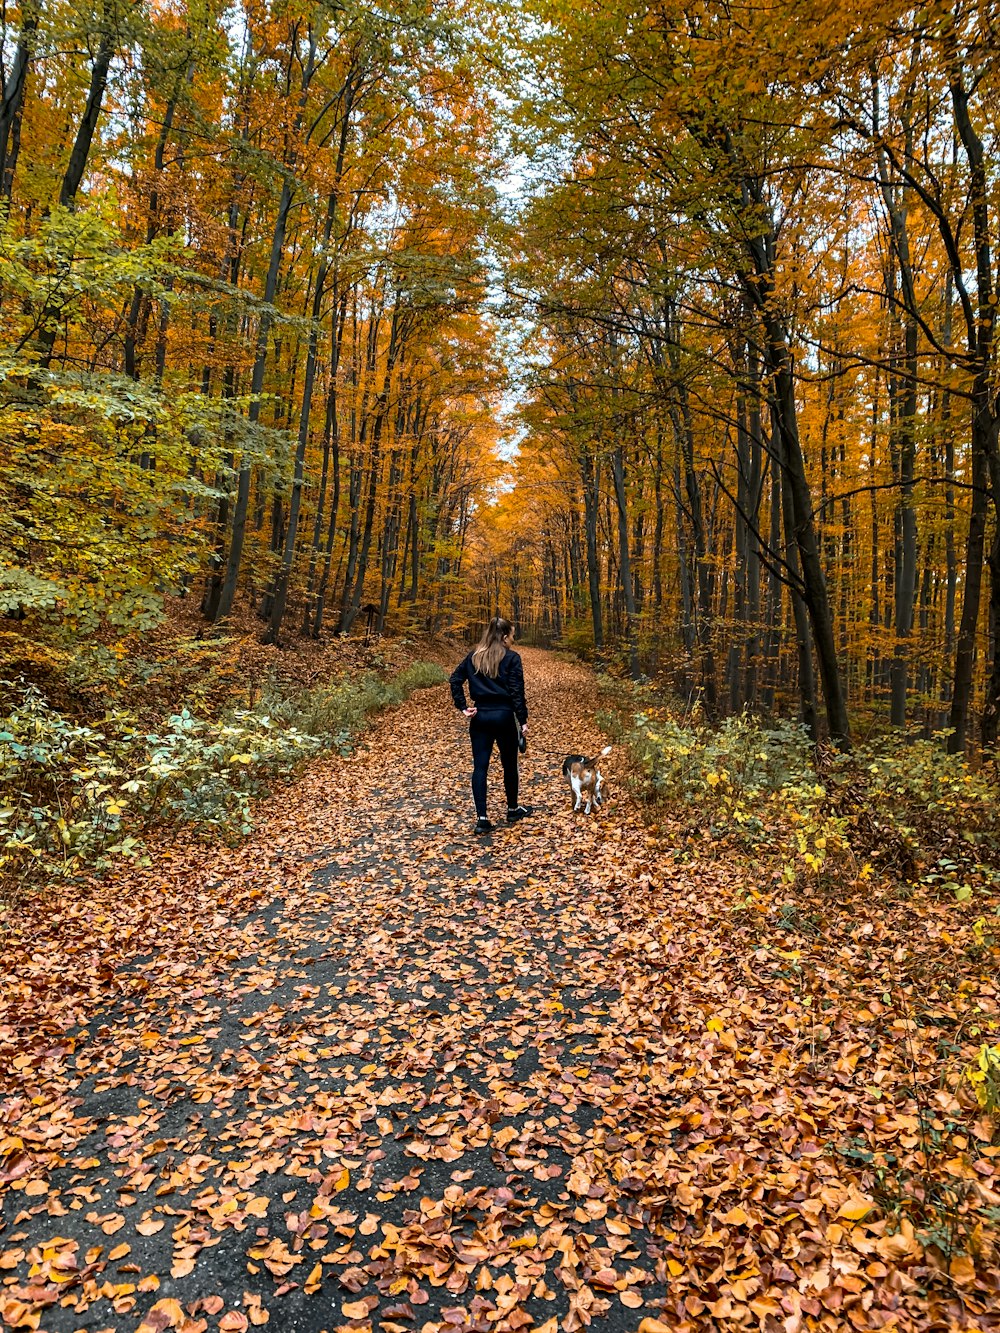 person in black jacket and black pants walking on brown dried leaves on ground